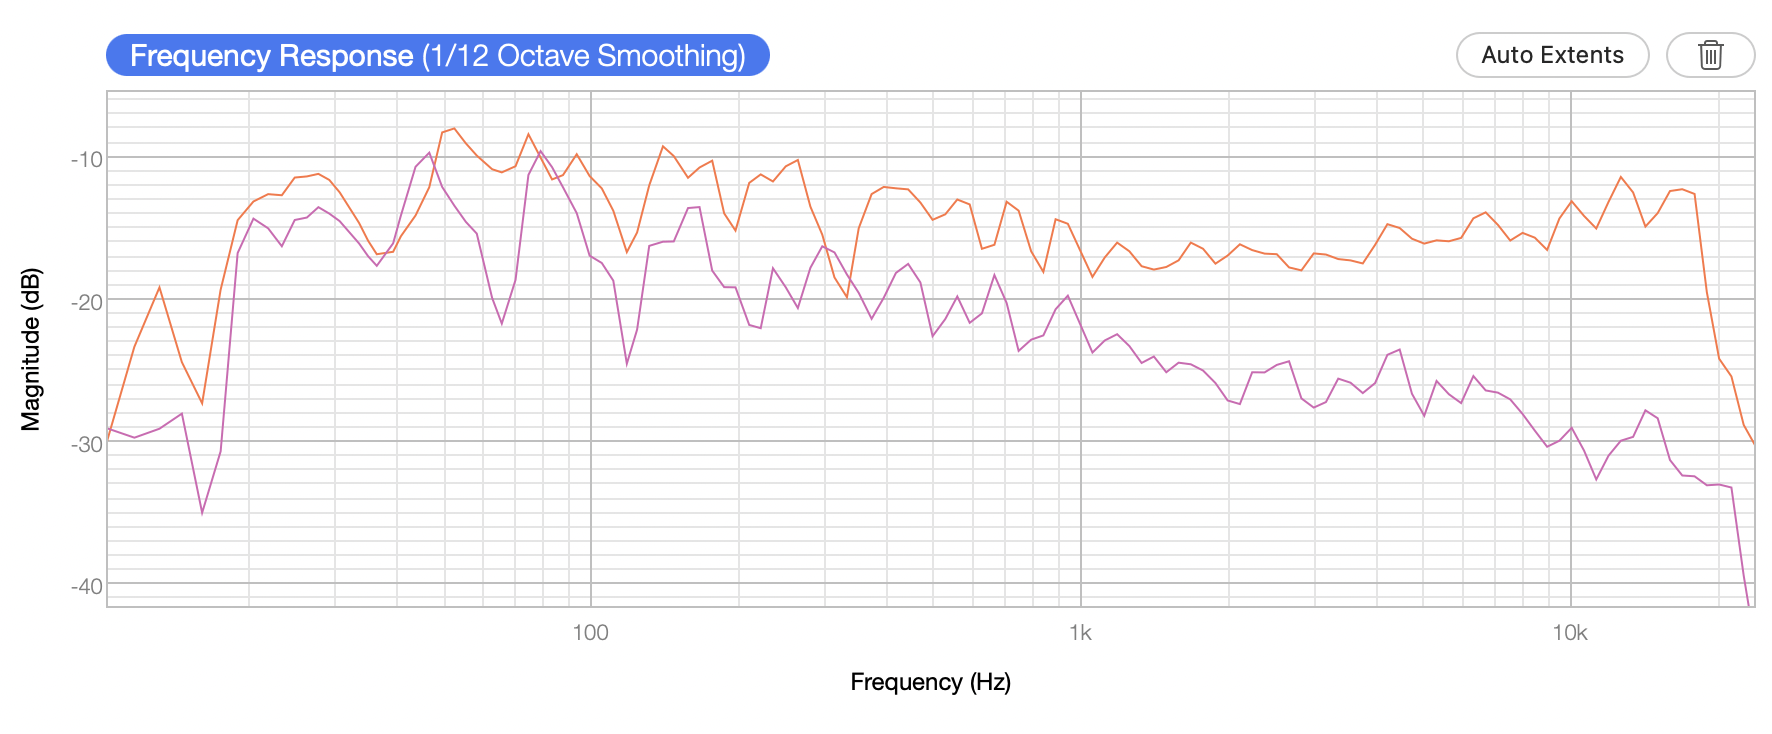 bitches brew on axis vs across the room 60 degrees off axis one-twelfth octave.png